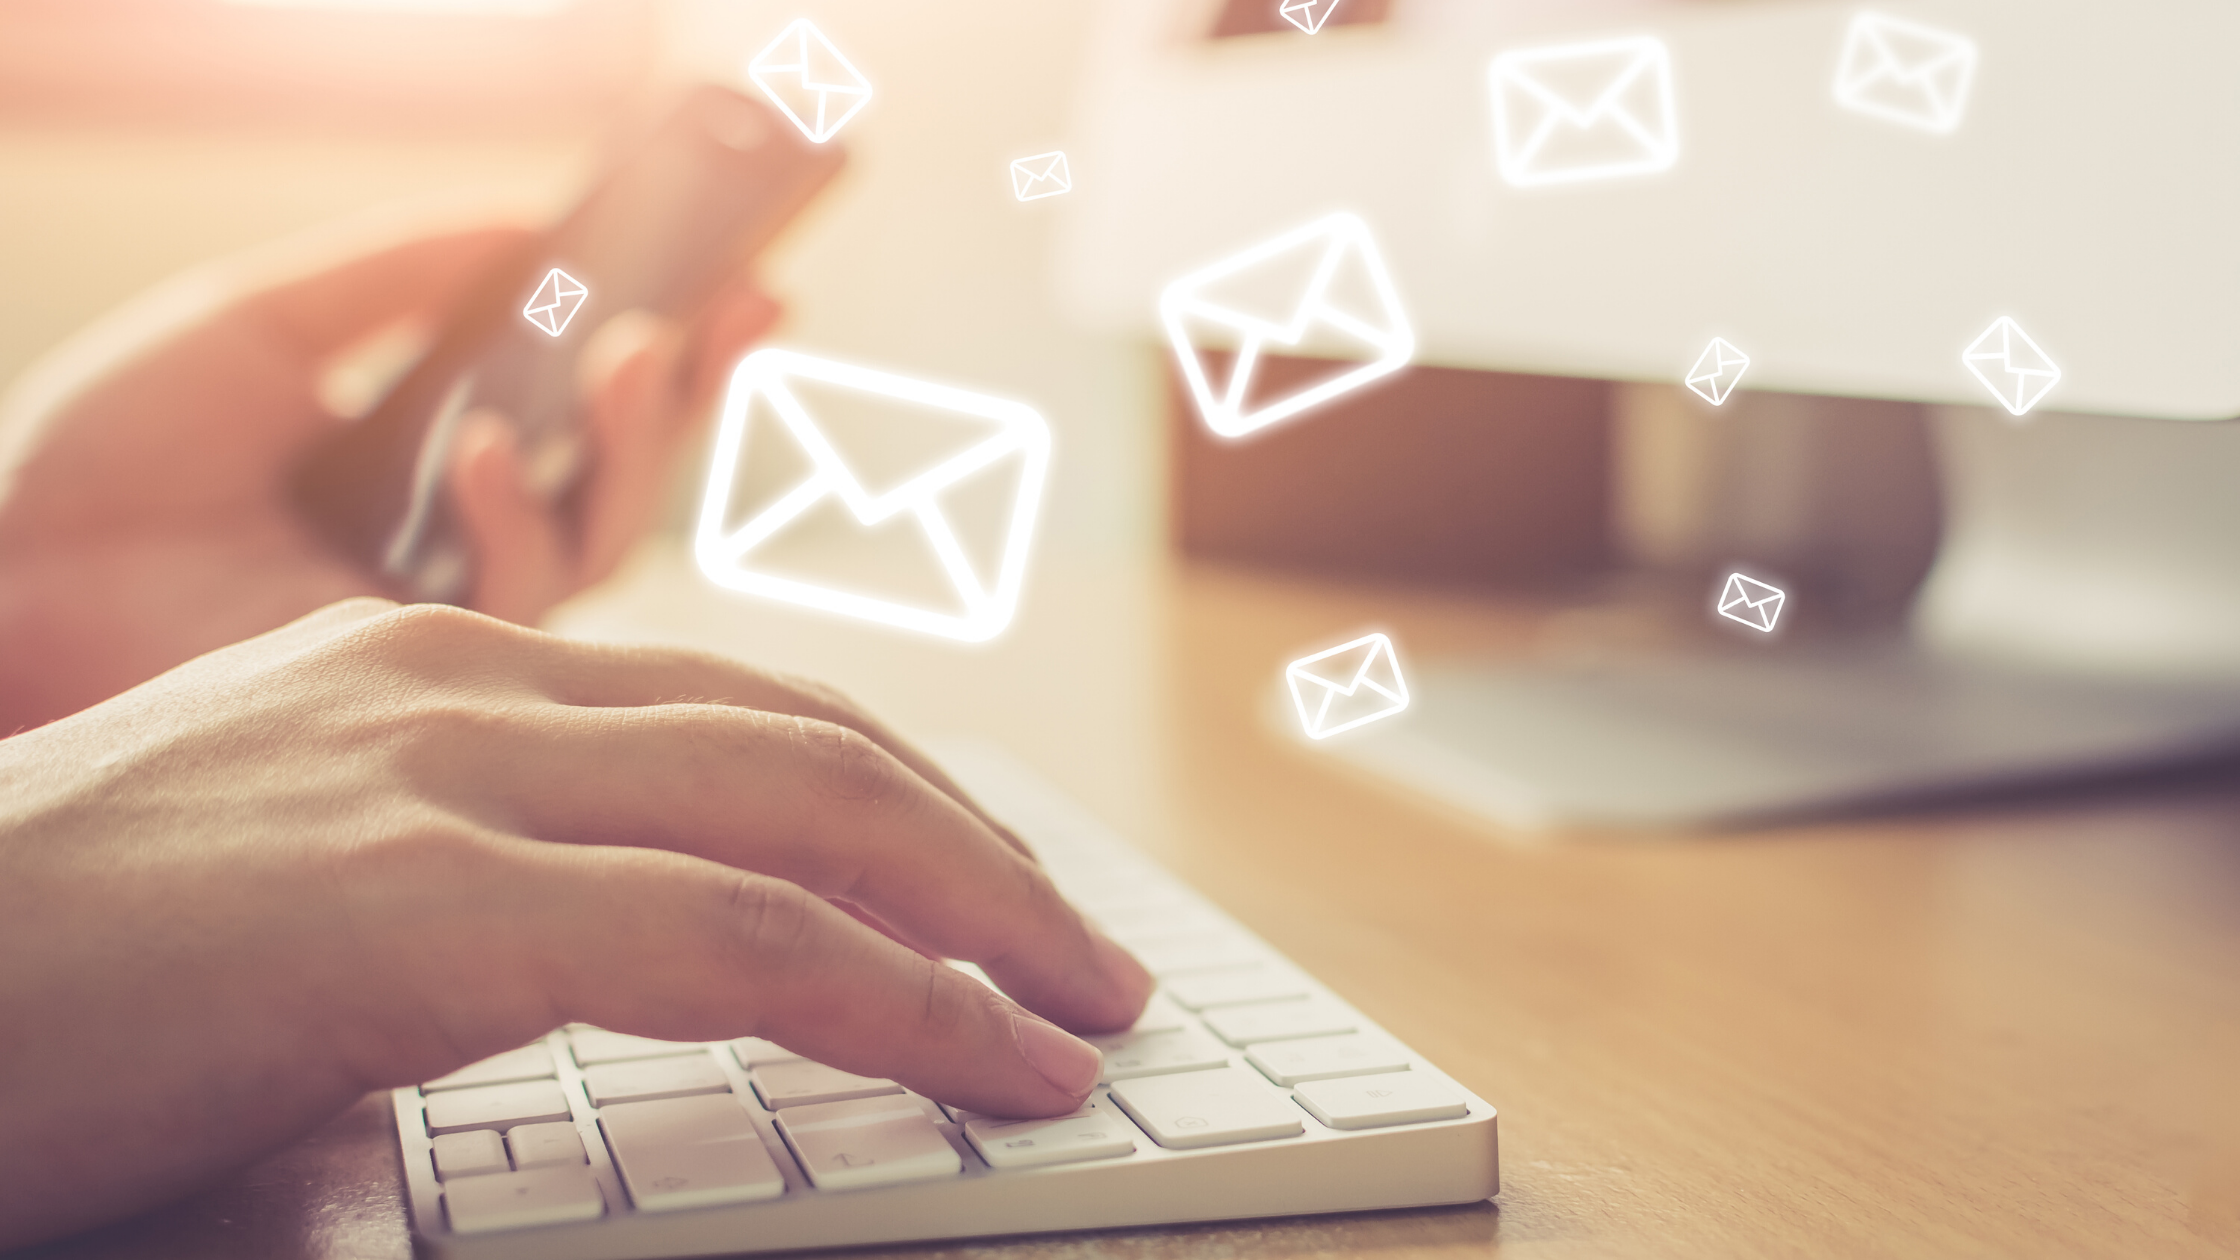 Our checklist to creating an email newsletter